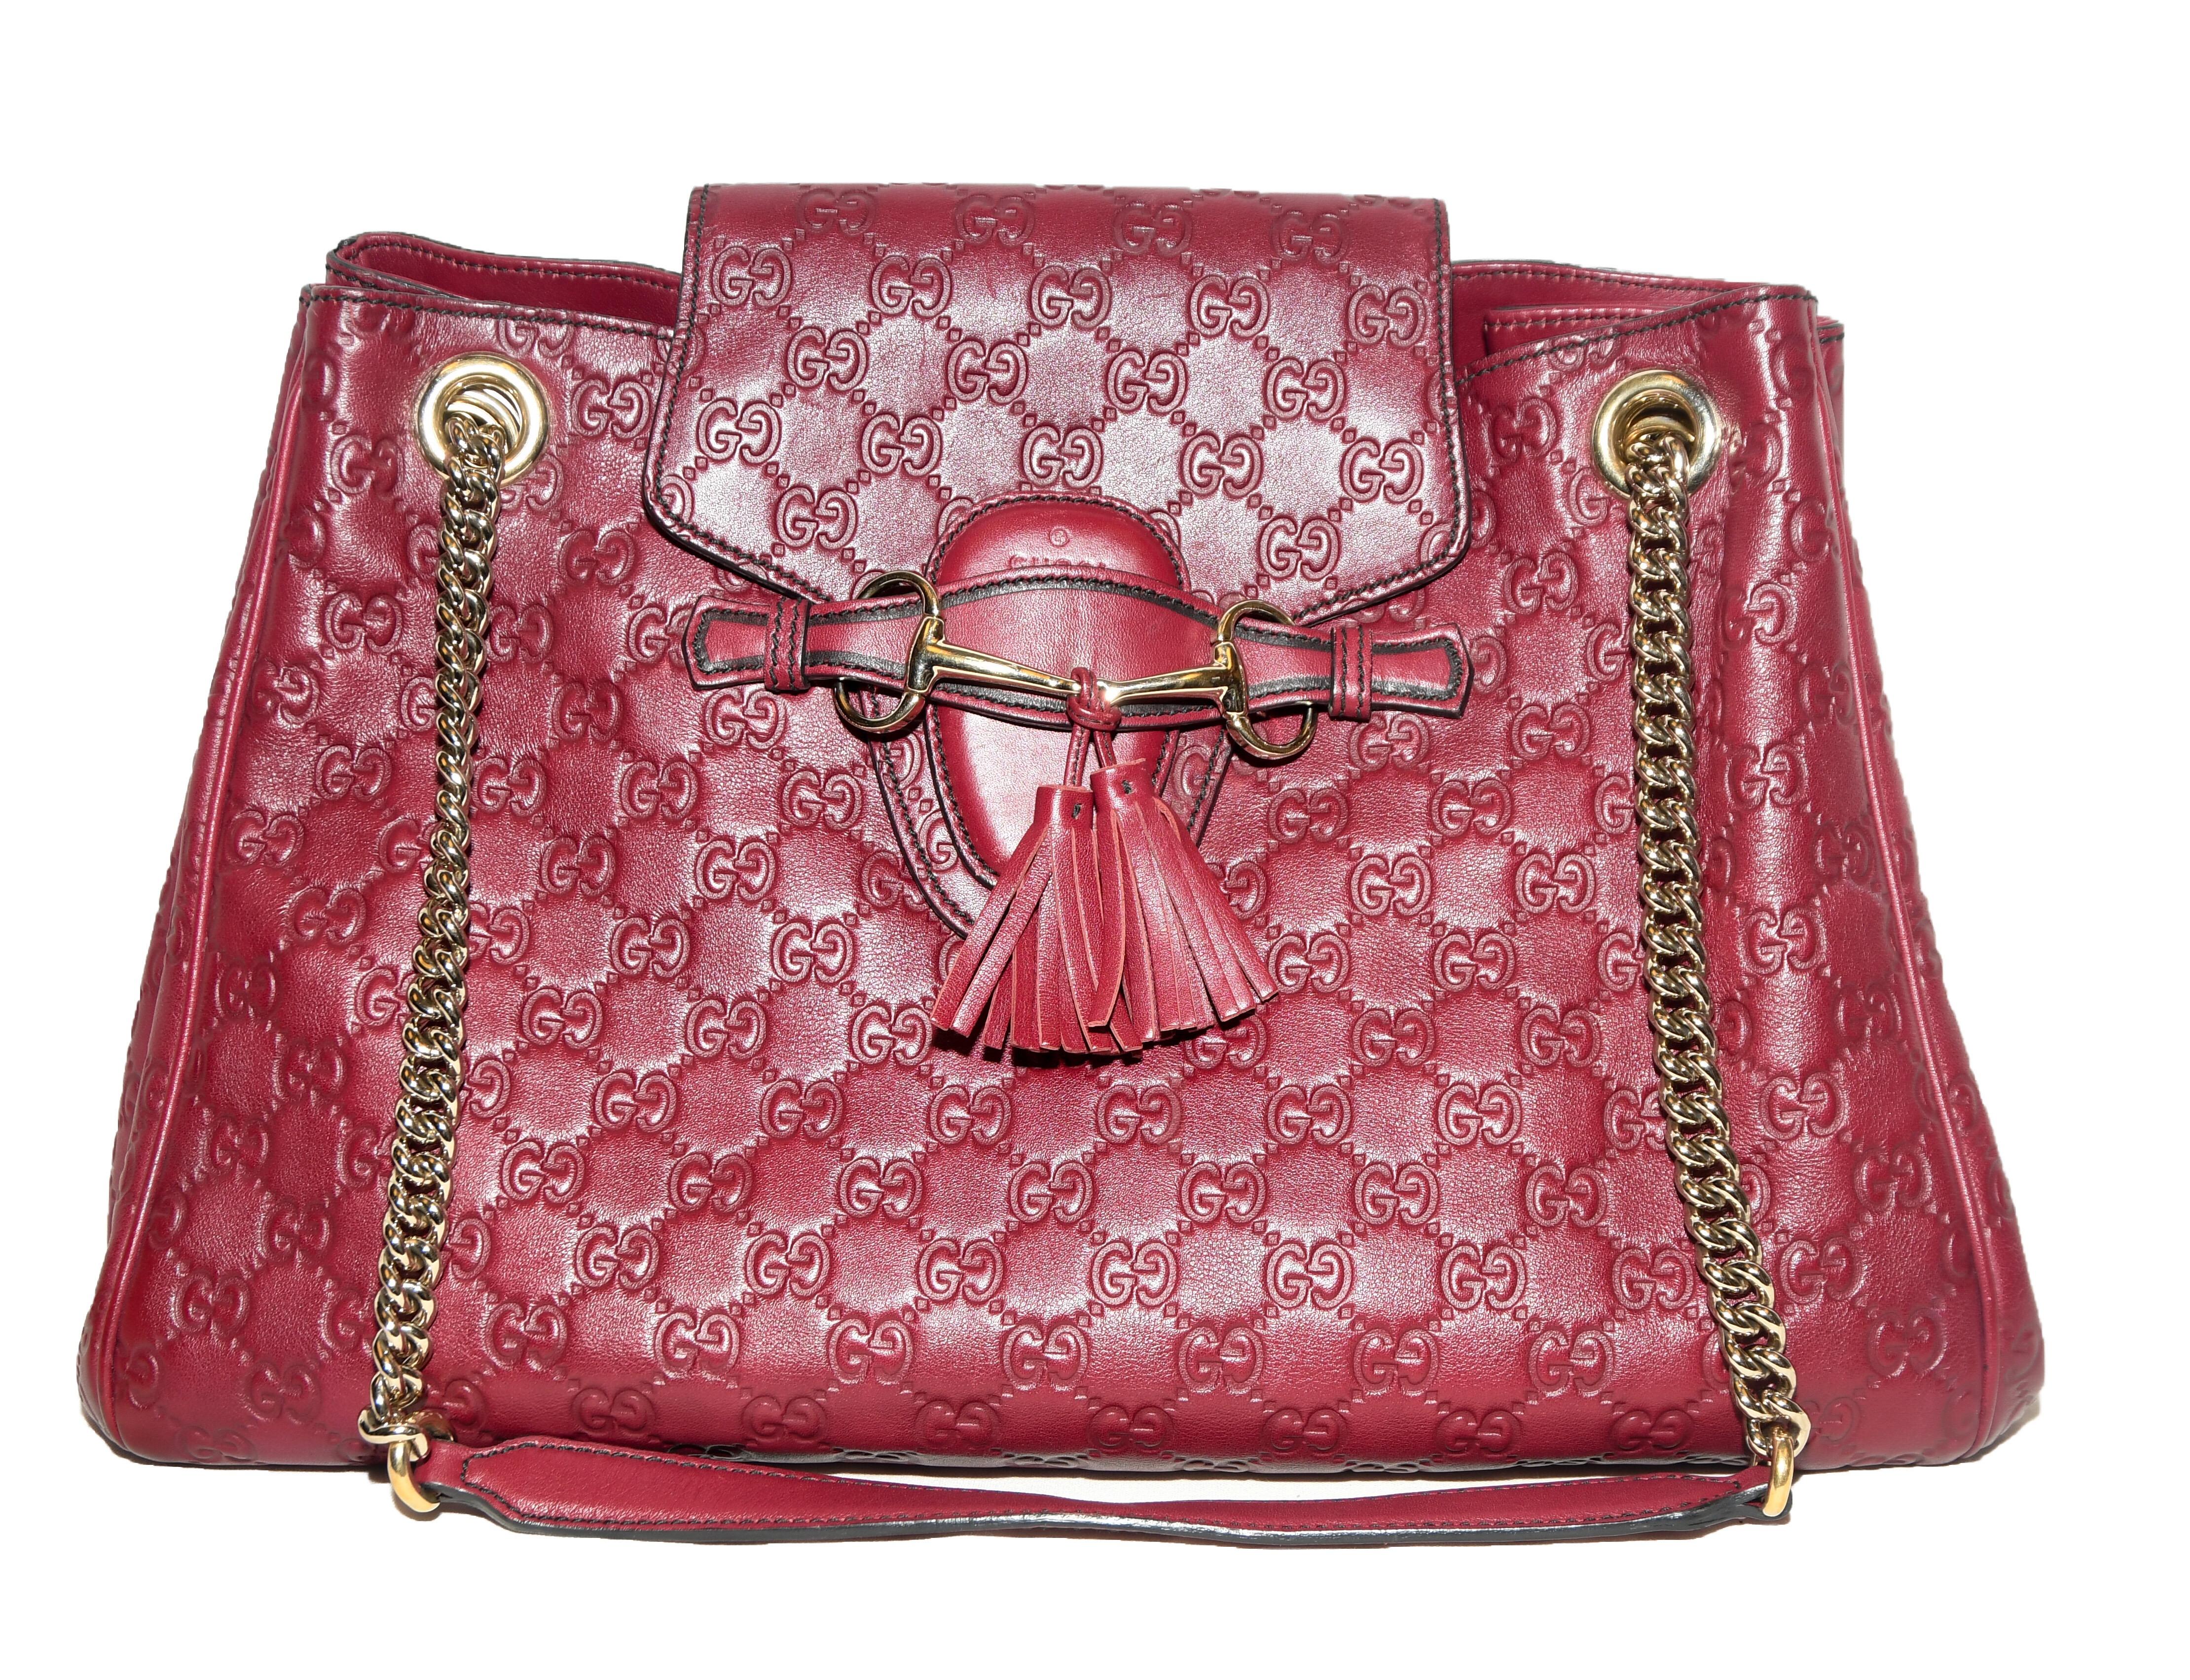 Gucci burgundy monogram embossed leather large shoulder bag includes brass tone chain link shoulder straps.  This single central pocket contains a small flap with tassel for closure at front.  The bag is lined in beige canvas.  Made in Italy 